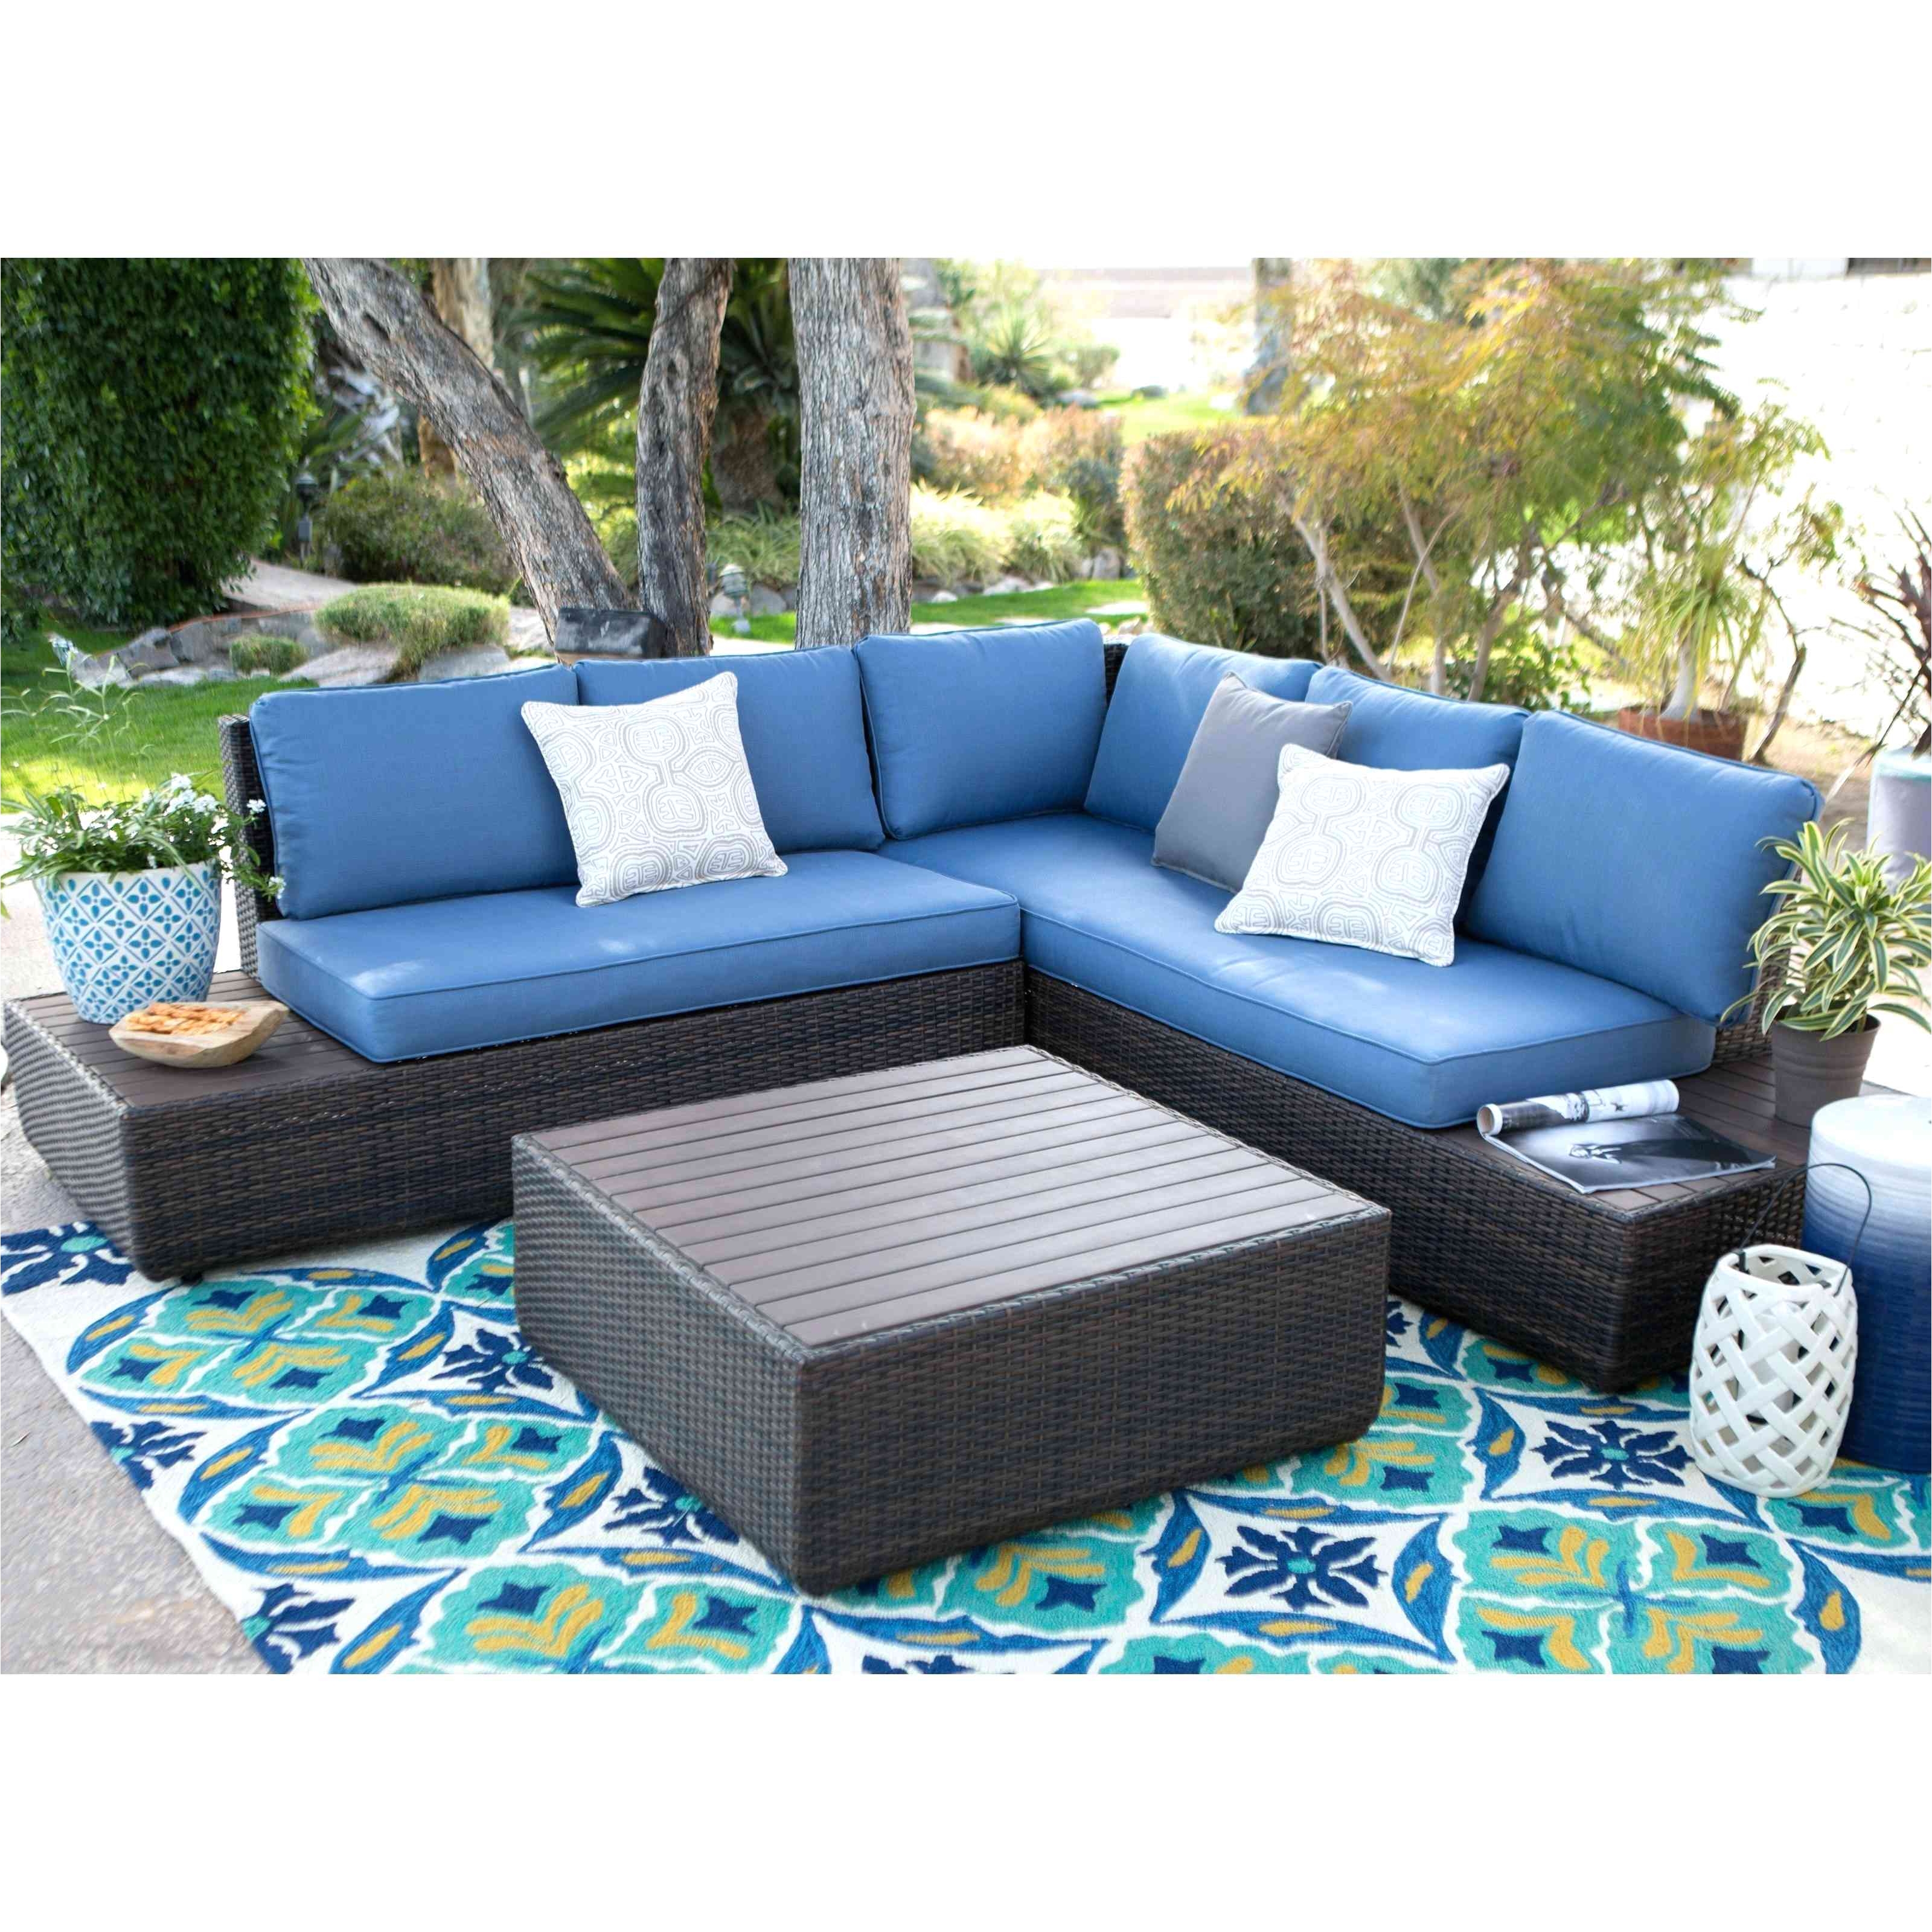 patio sets clearance fresh outdoor coffee tables wicker outdoor sofa 0d patio chairs sale